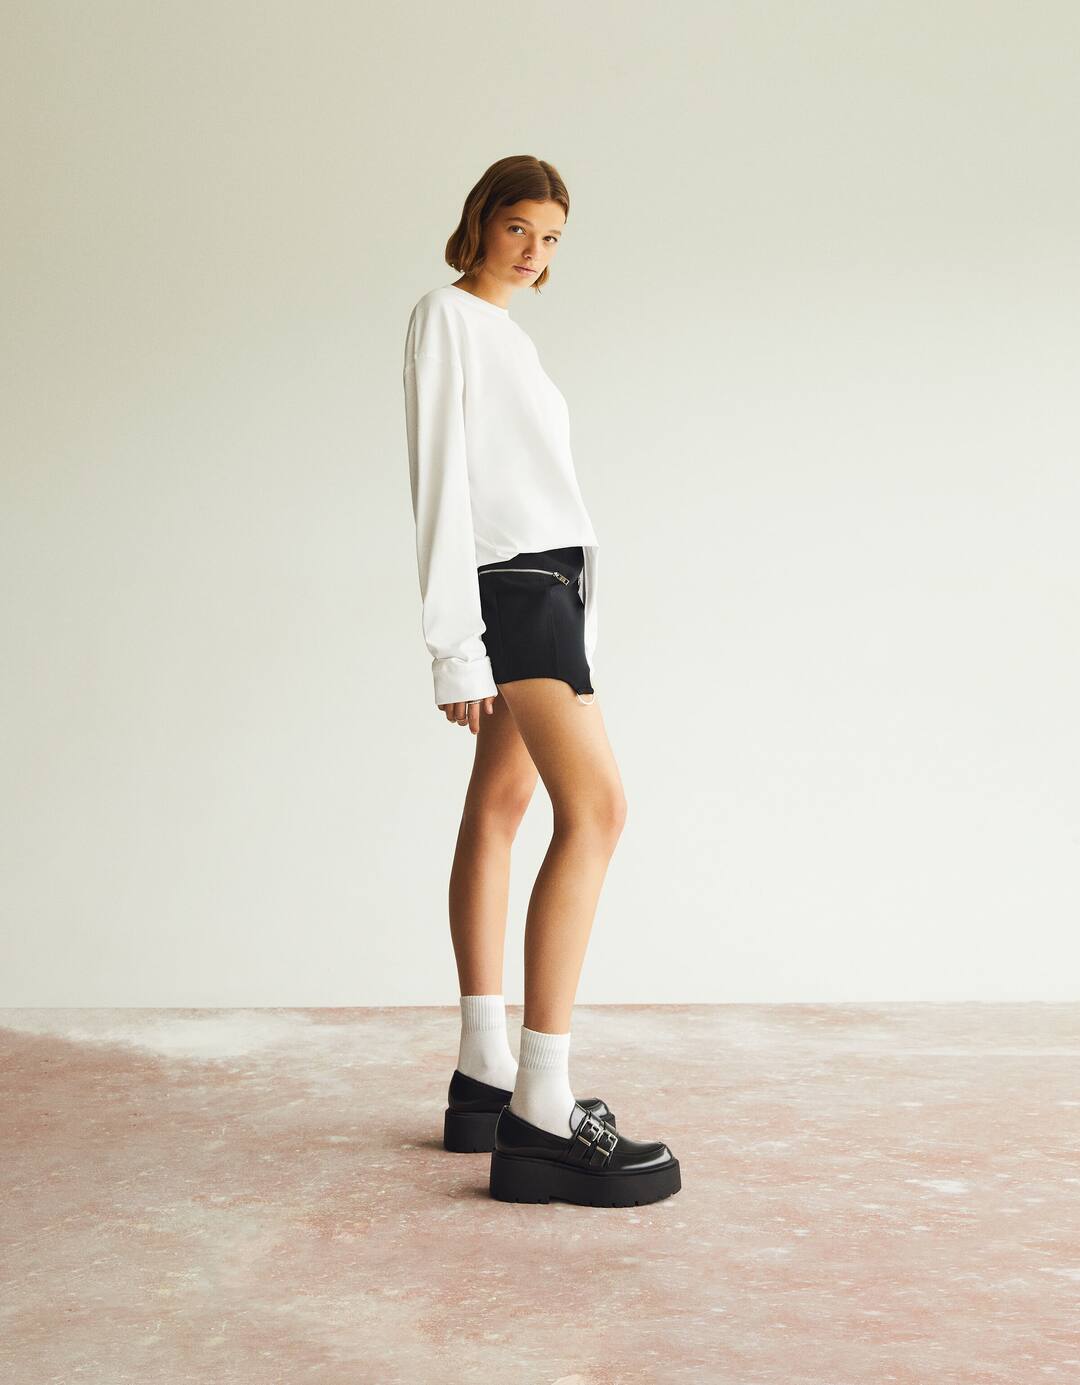 Platform shoes with buckles